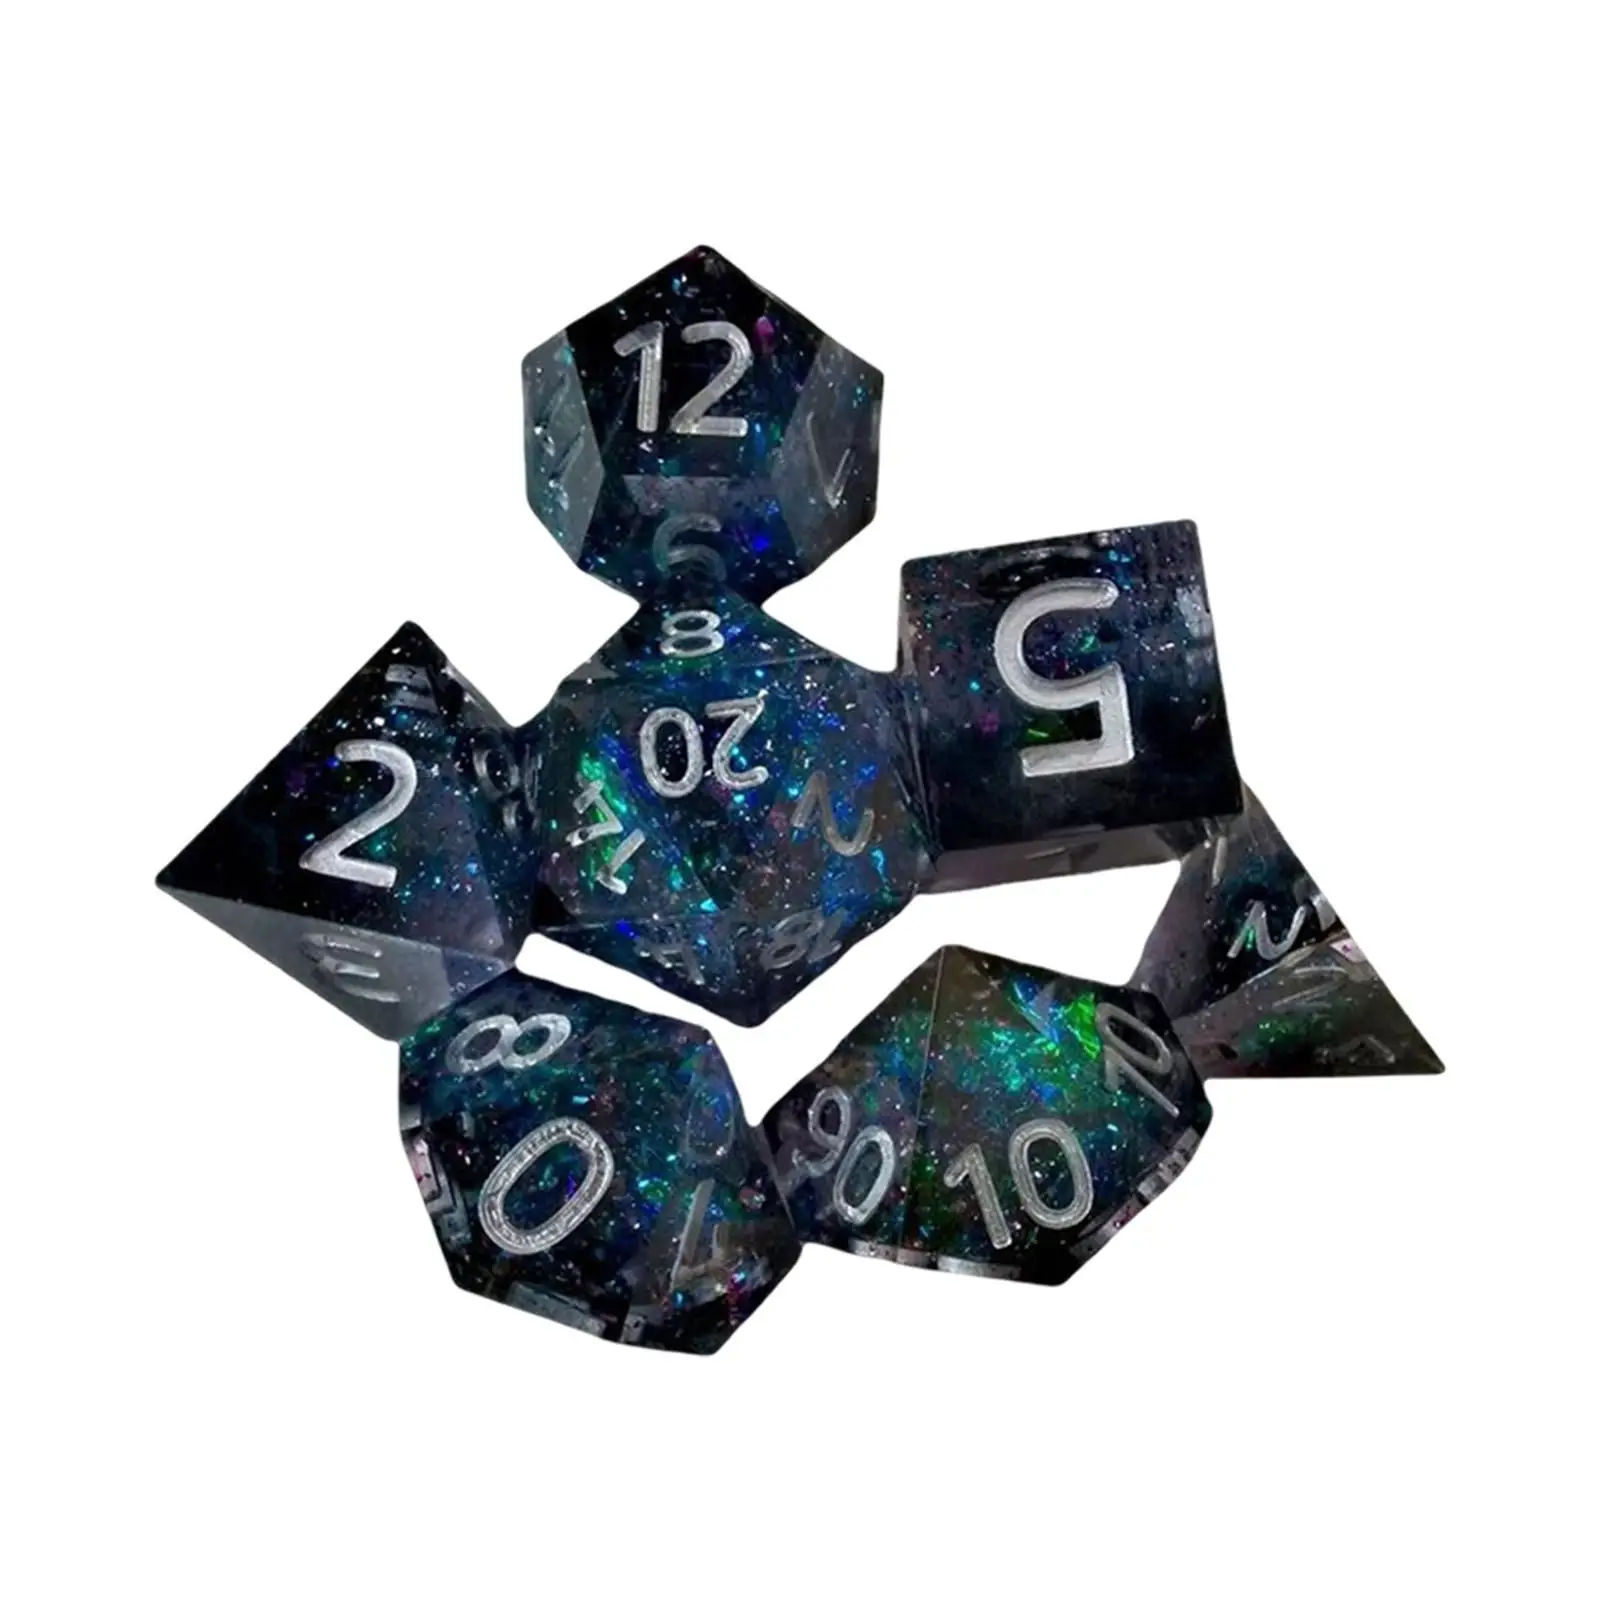 7 Pieces Resin Polyhedron Dices Entertainment Toy for Role Playing Game